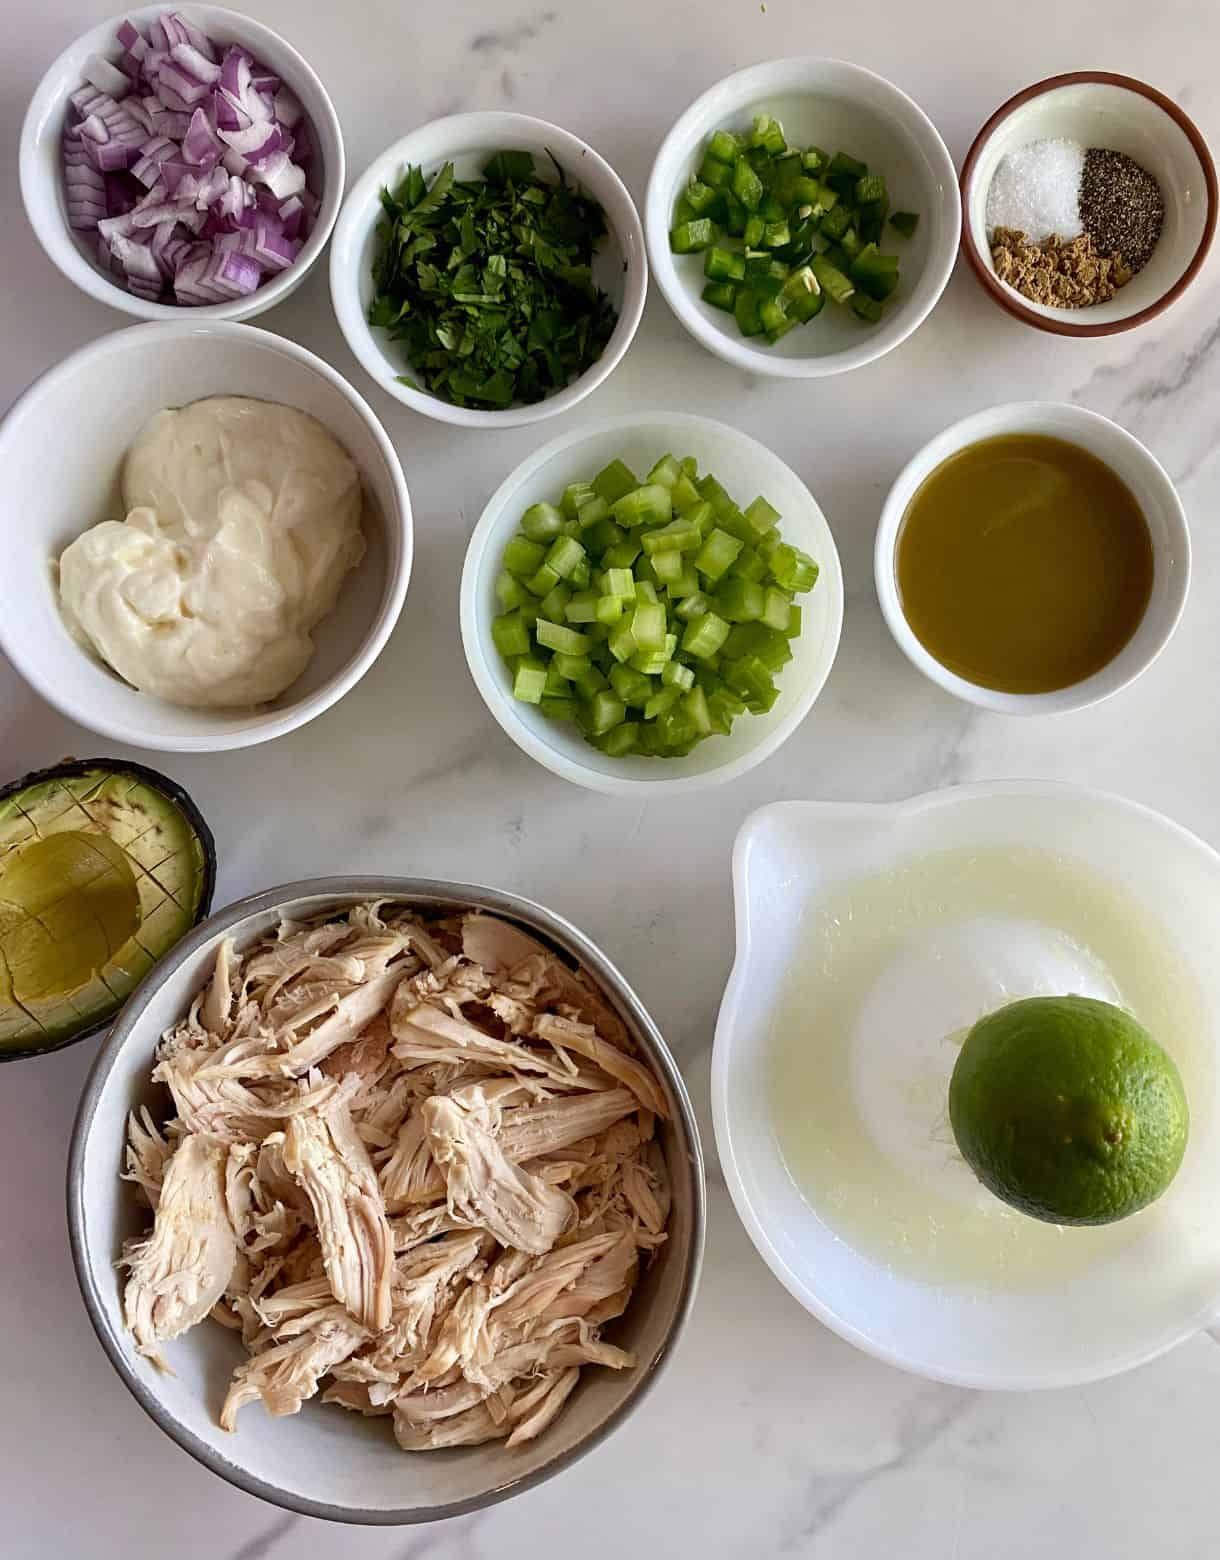 Ingredients for Guacamole Chicken Salad. Shredded chicken, avocado, lime juice, diced celery, diced red onion, chopped cilantro, chopped jalapeno, jalapeno hot sauce, mayonnaise, salt, pepper and cumin.